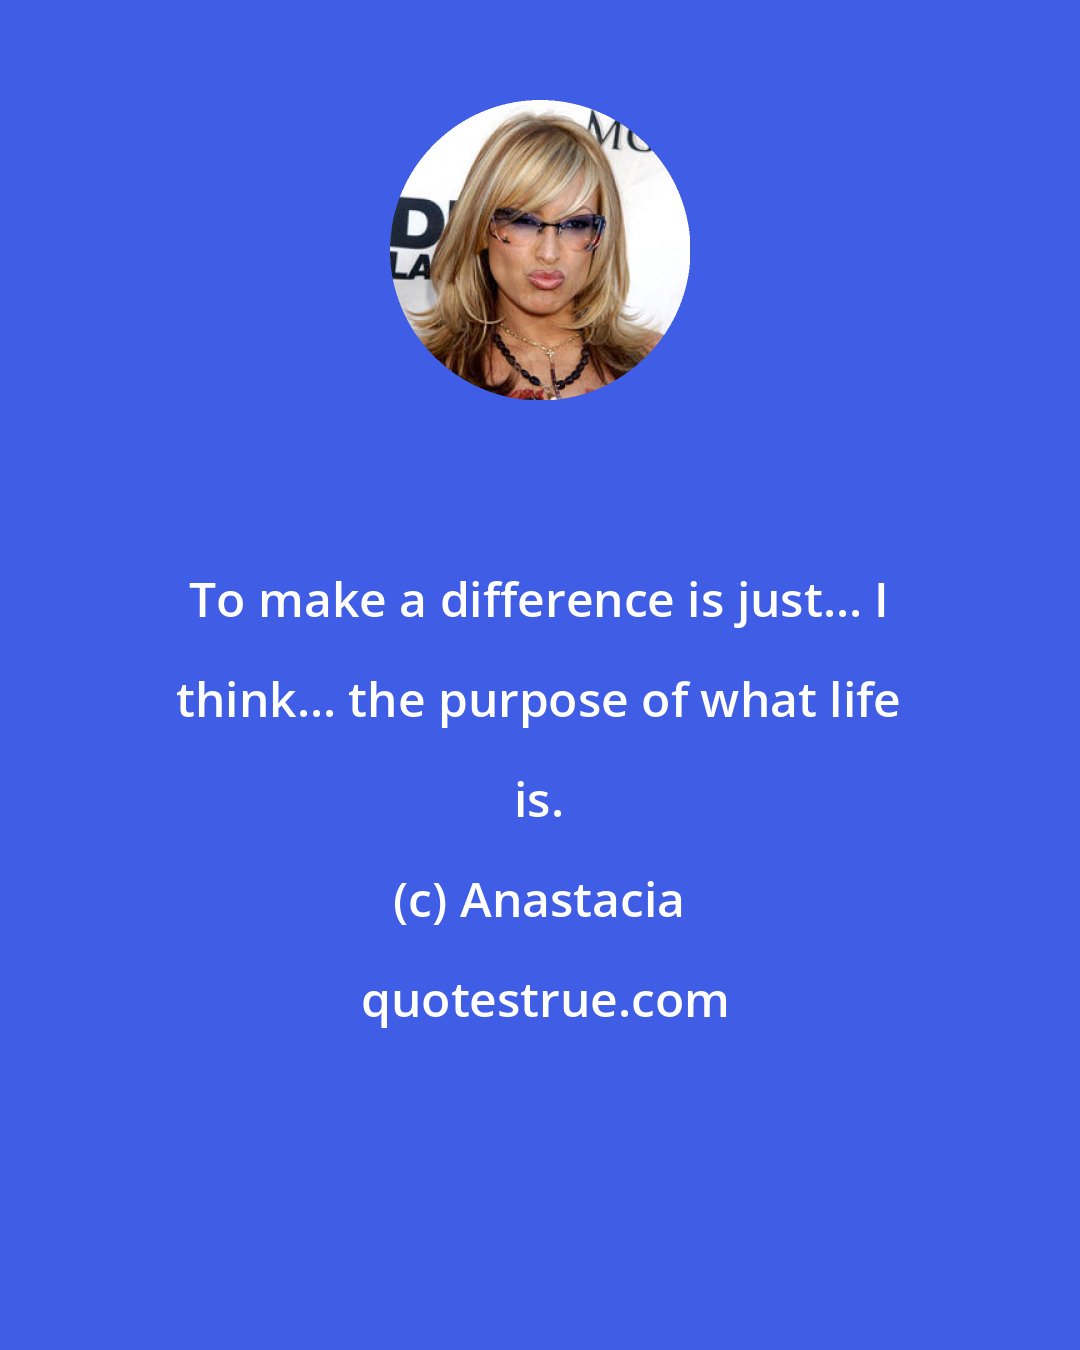 Anastacia: To make a difference is just... I think... the purpose of what life is.